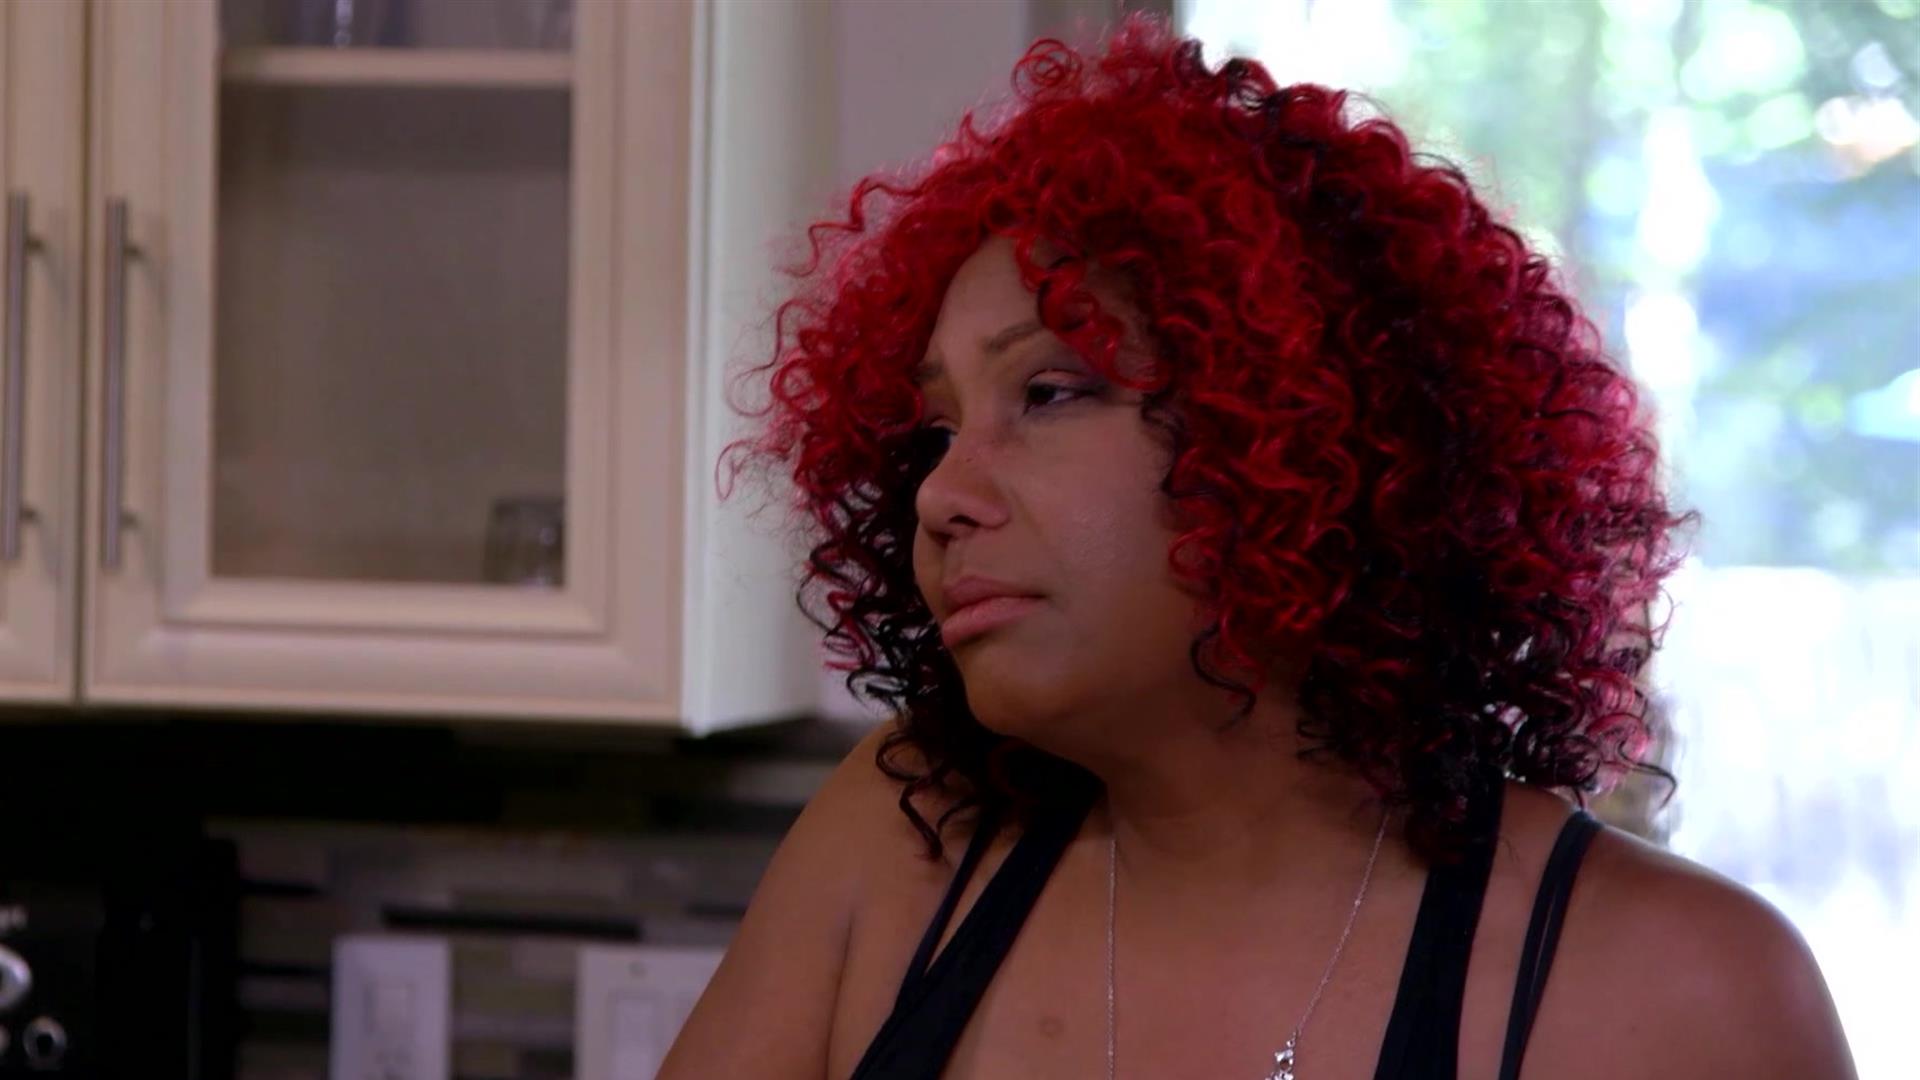 Will Traci Choose Her Career or Family?